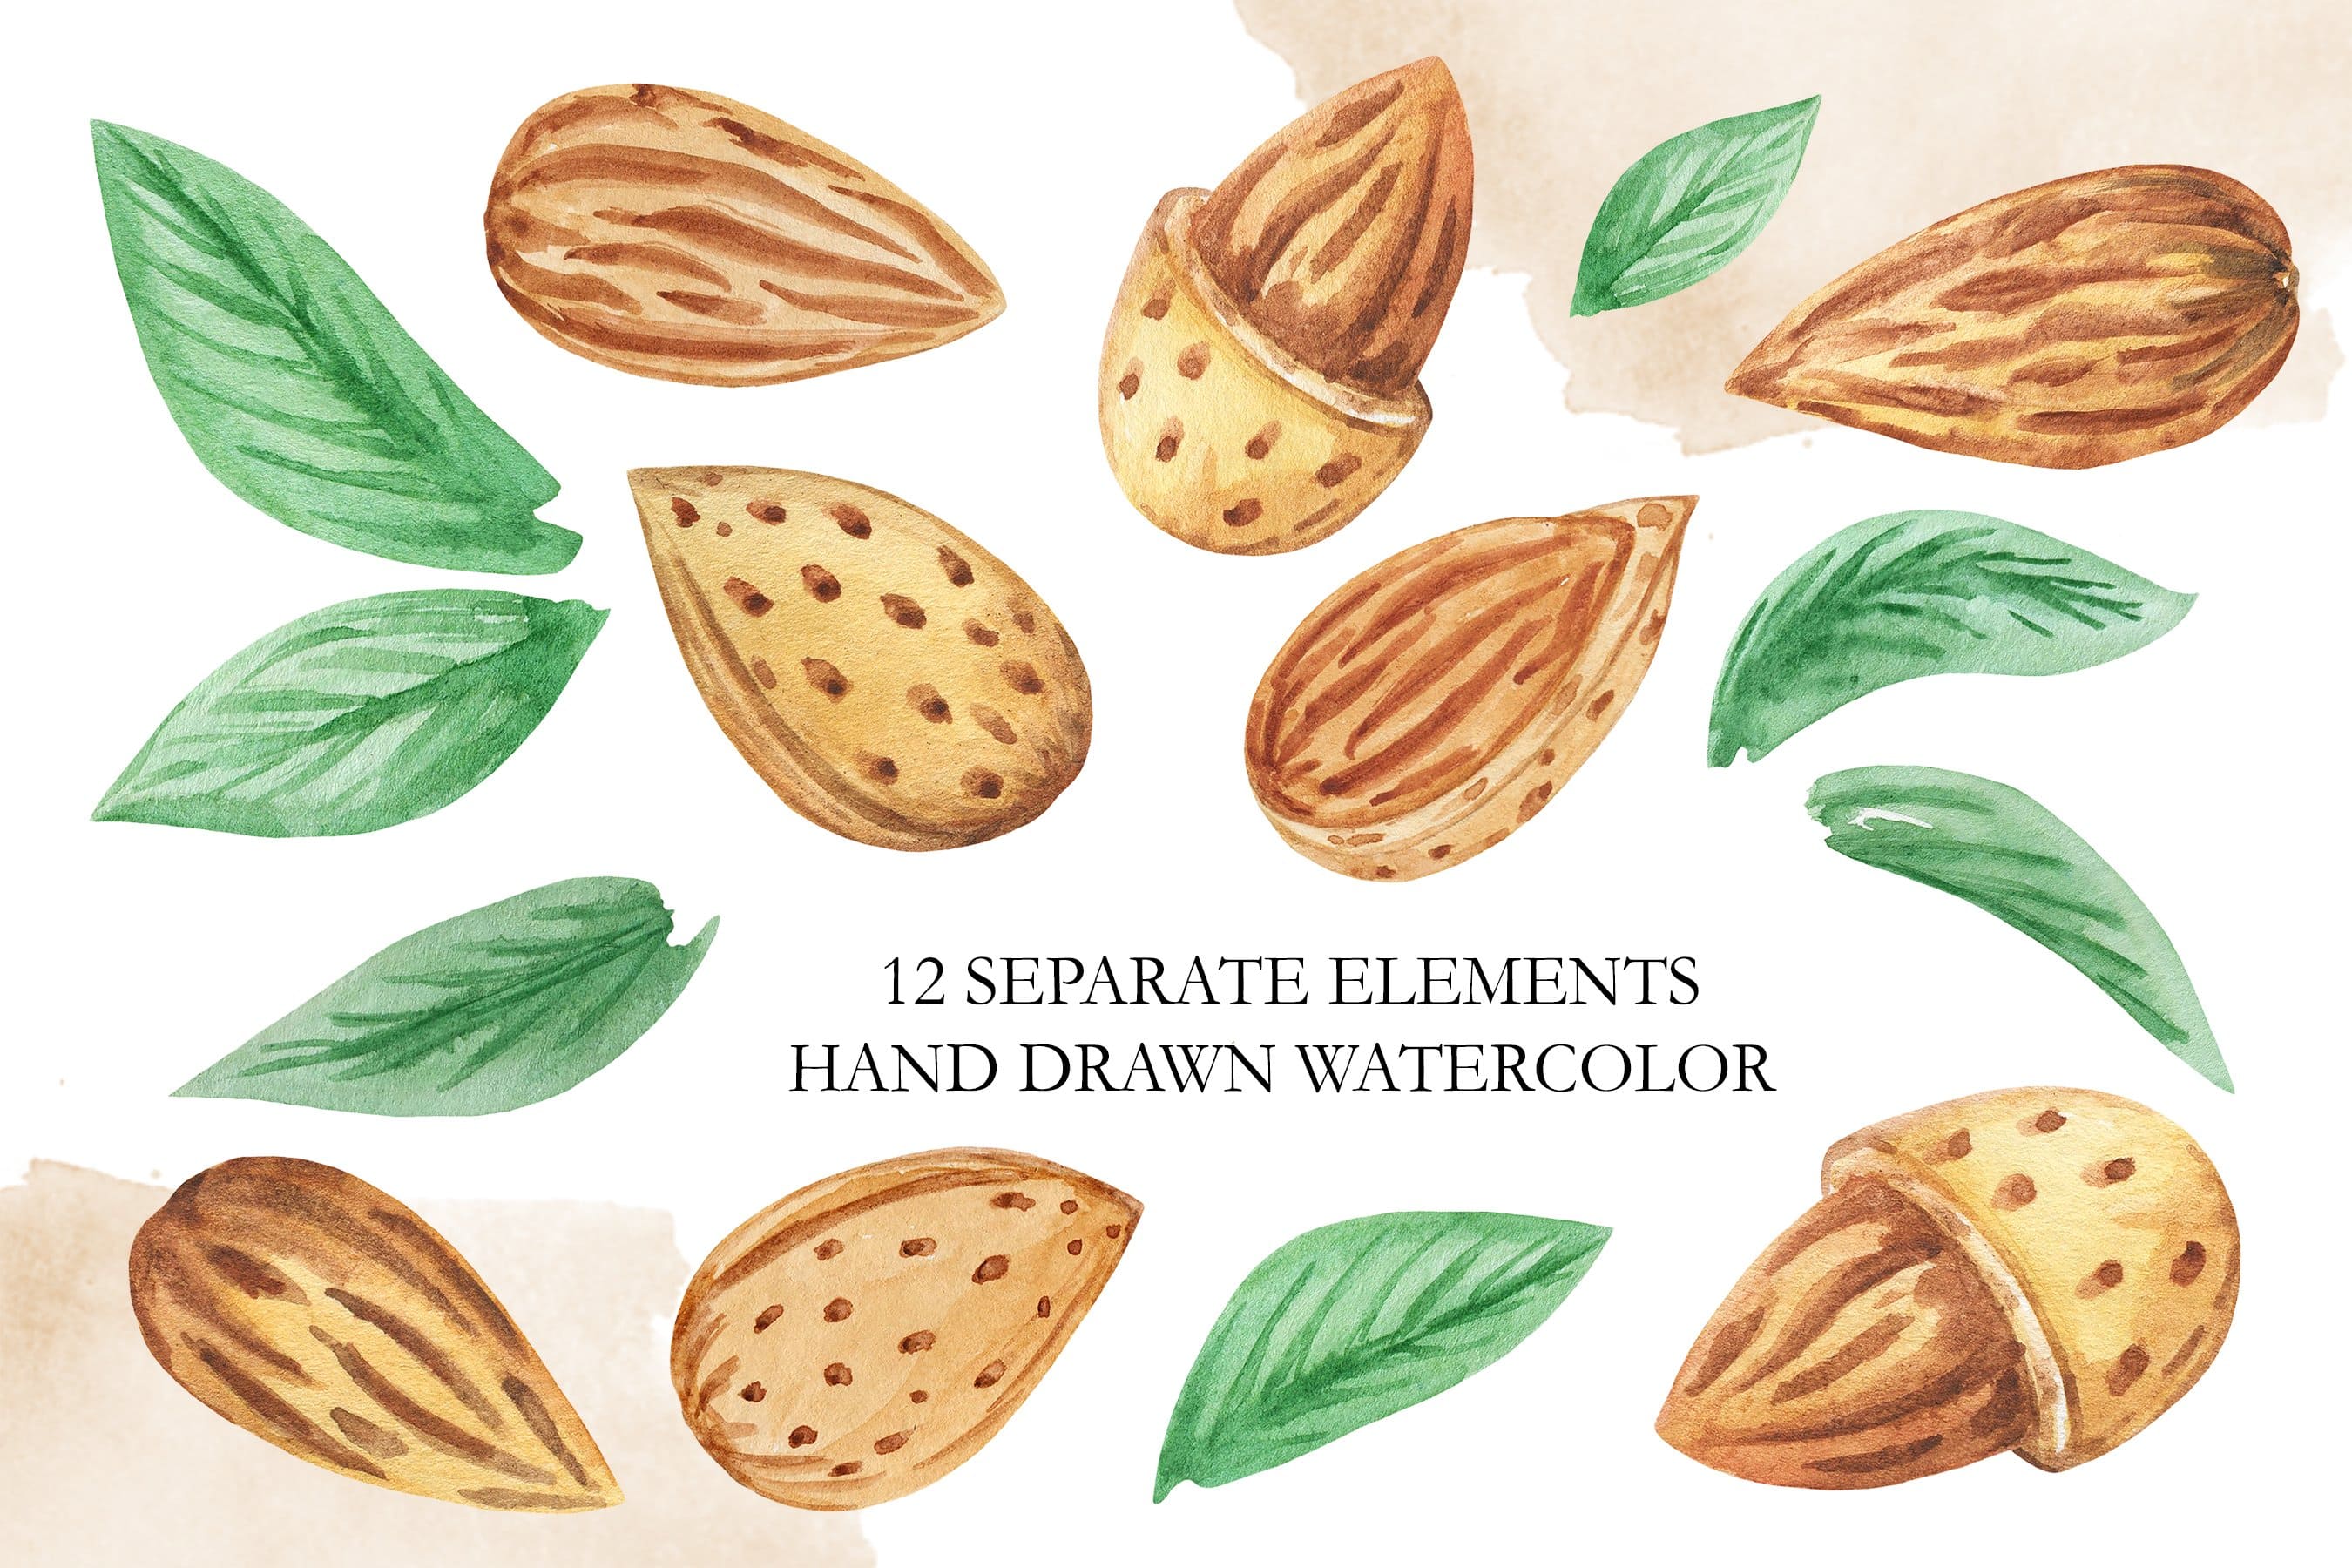 Almond leaves and its grains are painted in watercolor on a white background.